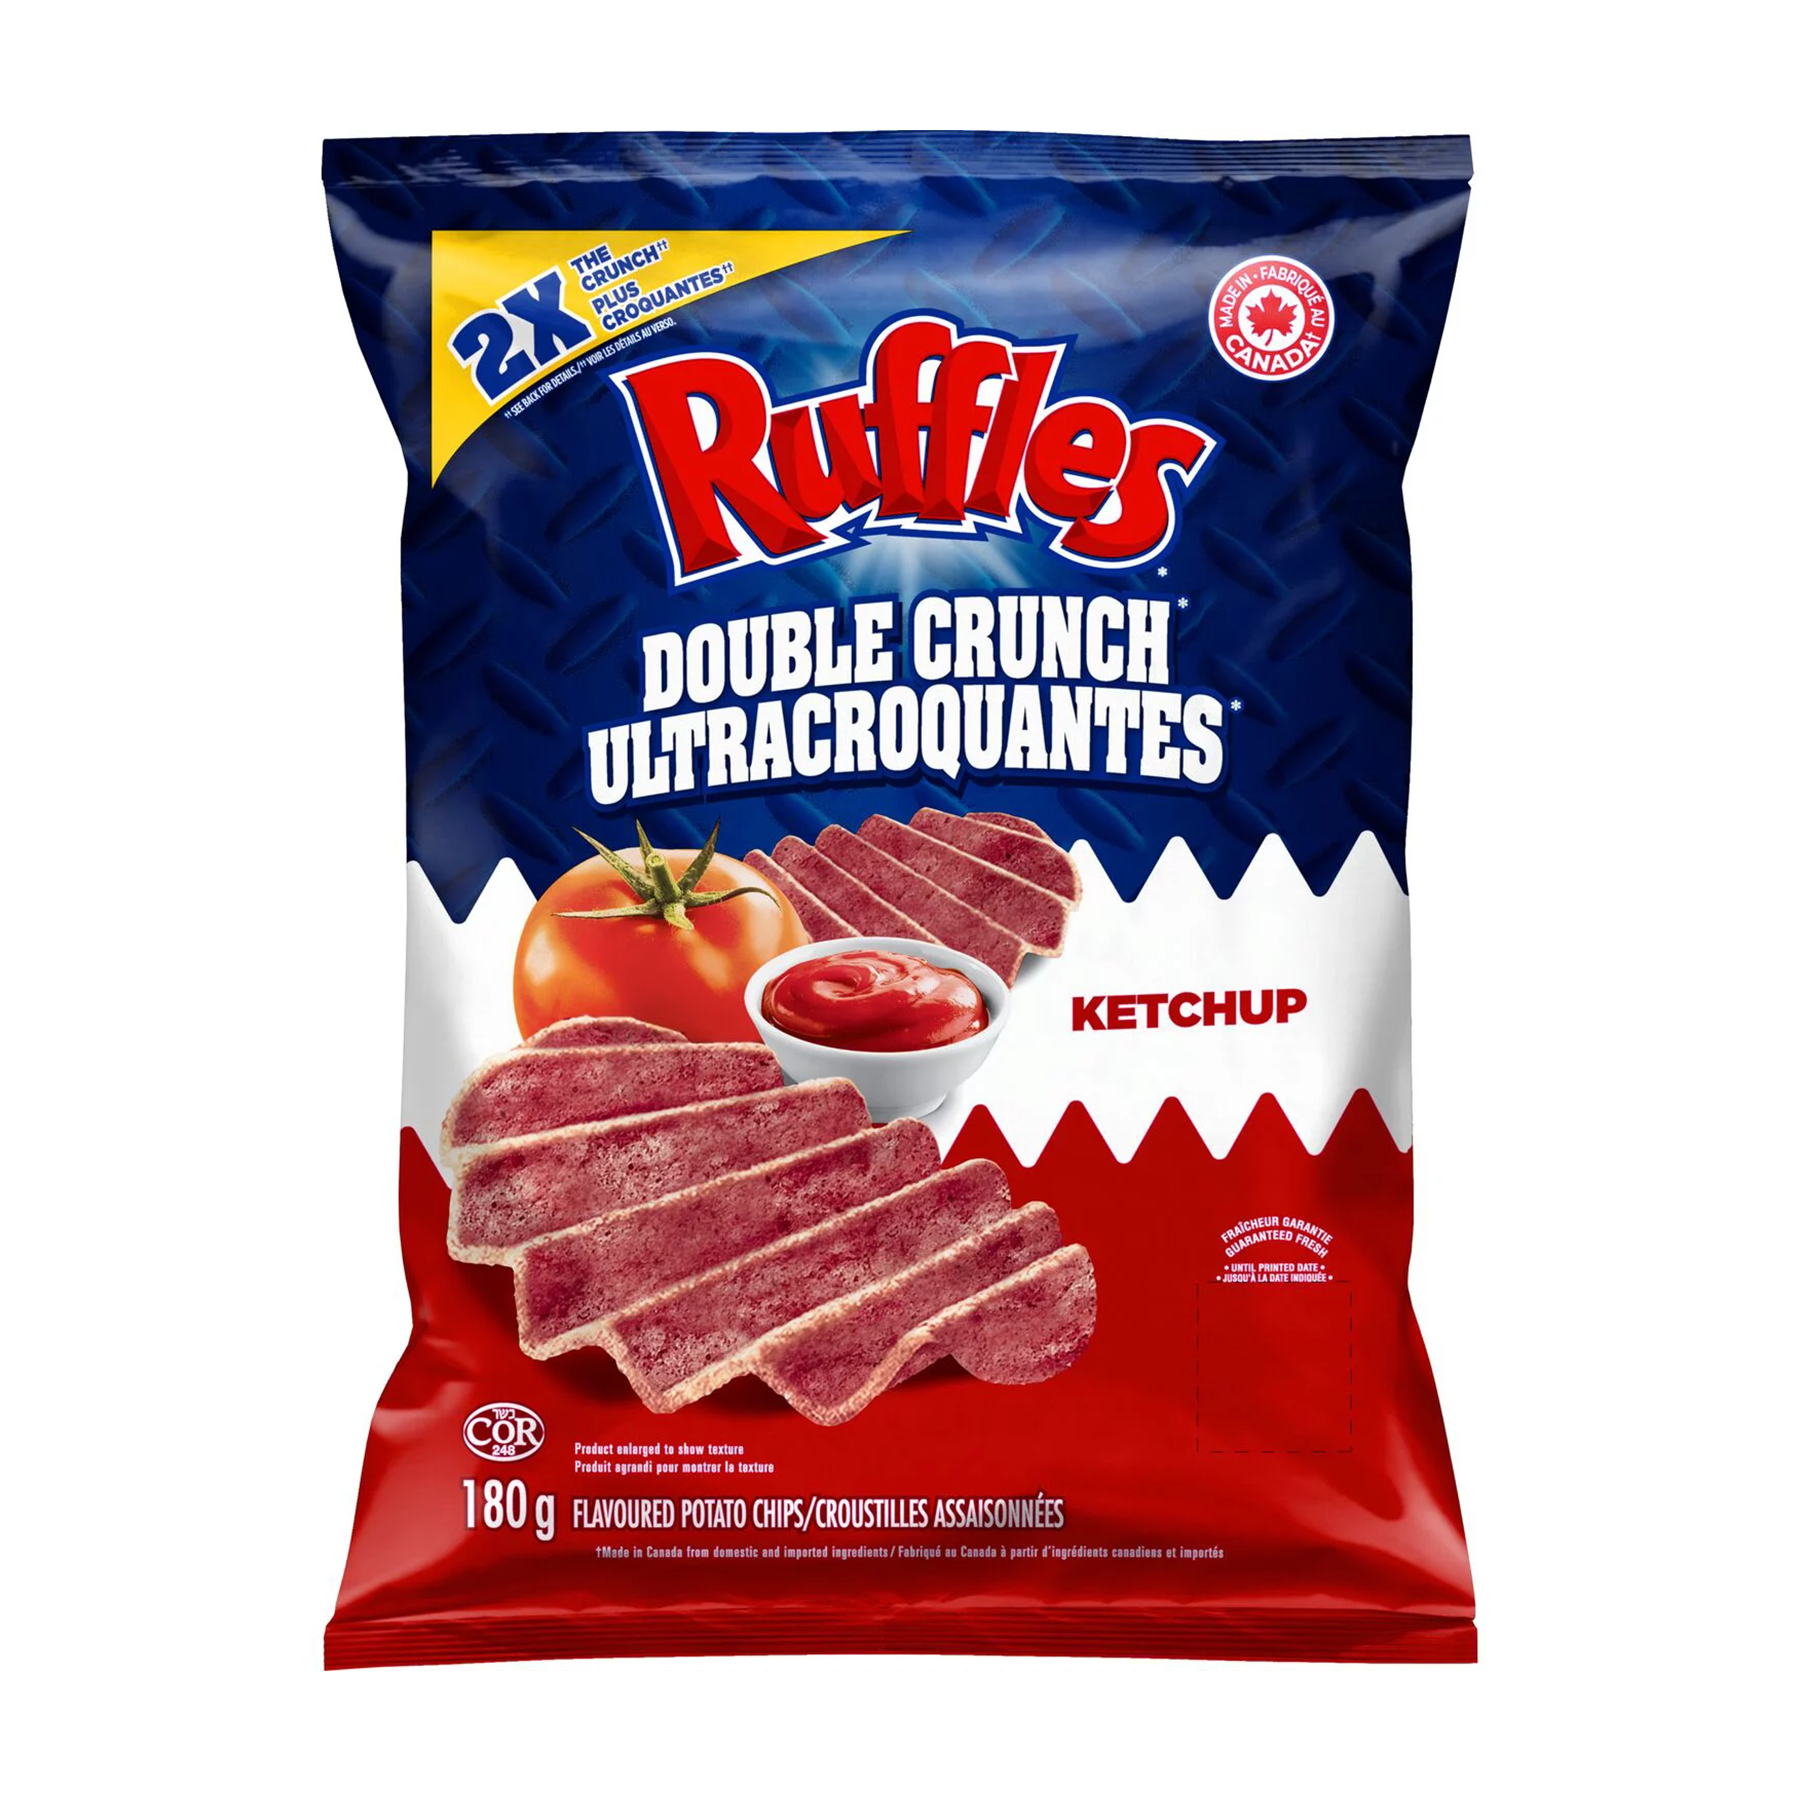 Ruffles Double Crunch Ketchup Flavored Chips